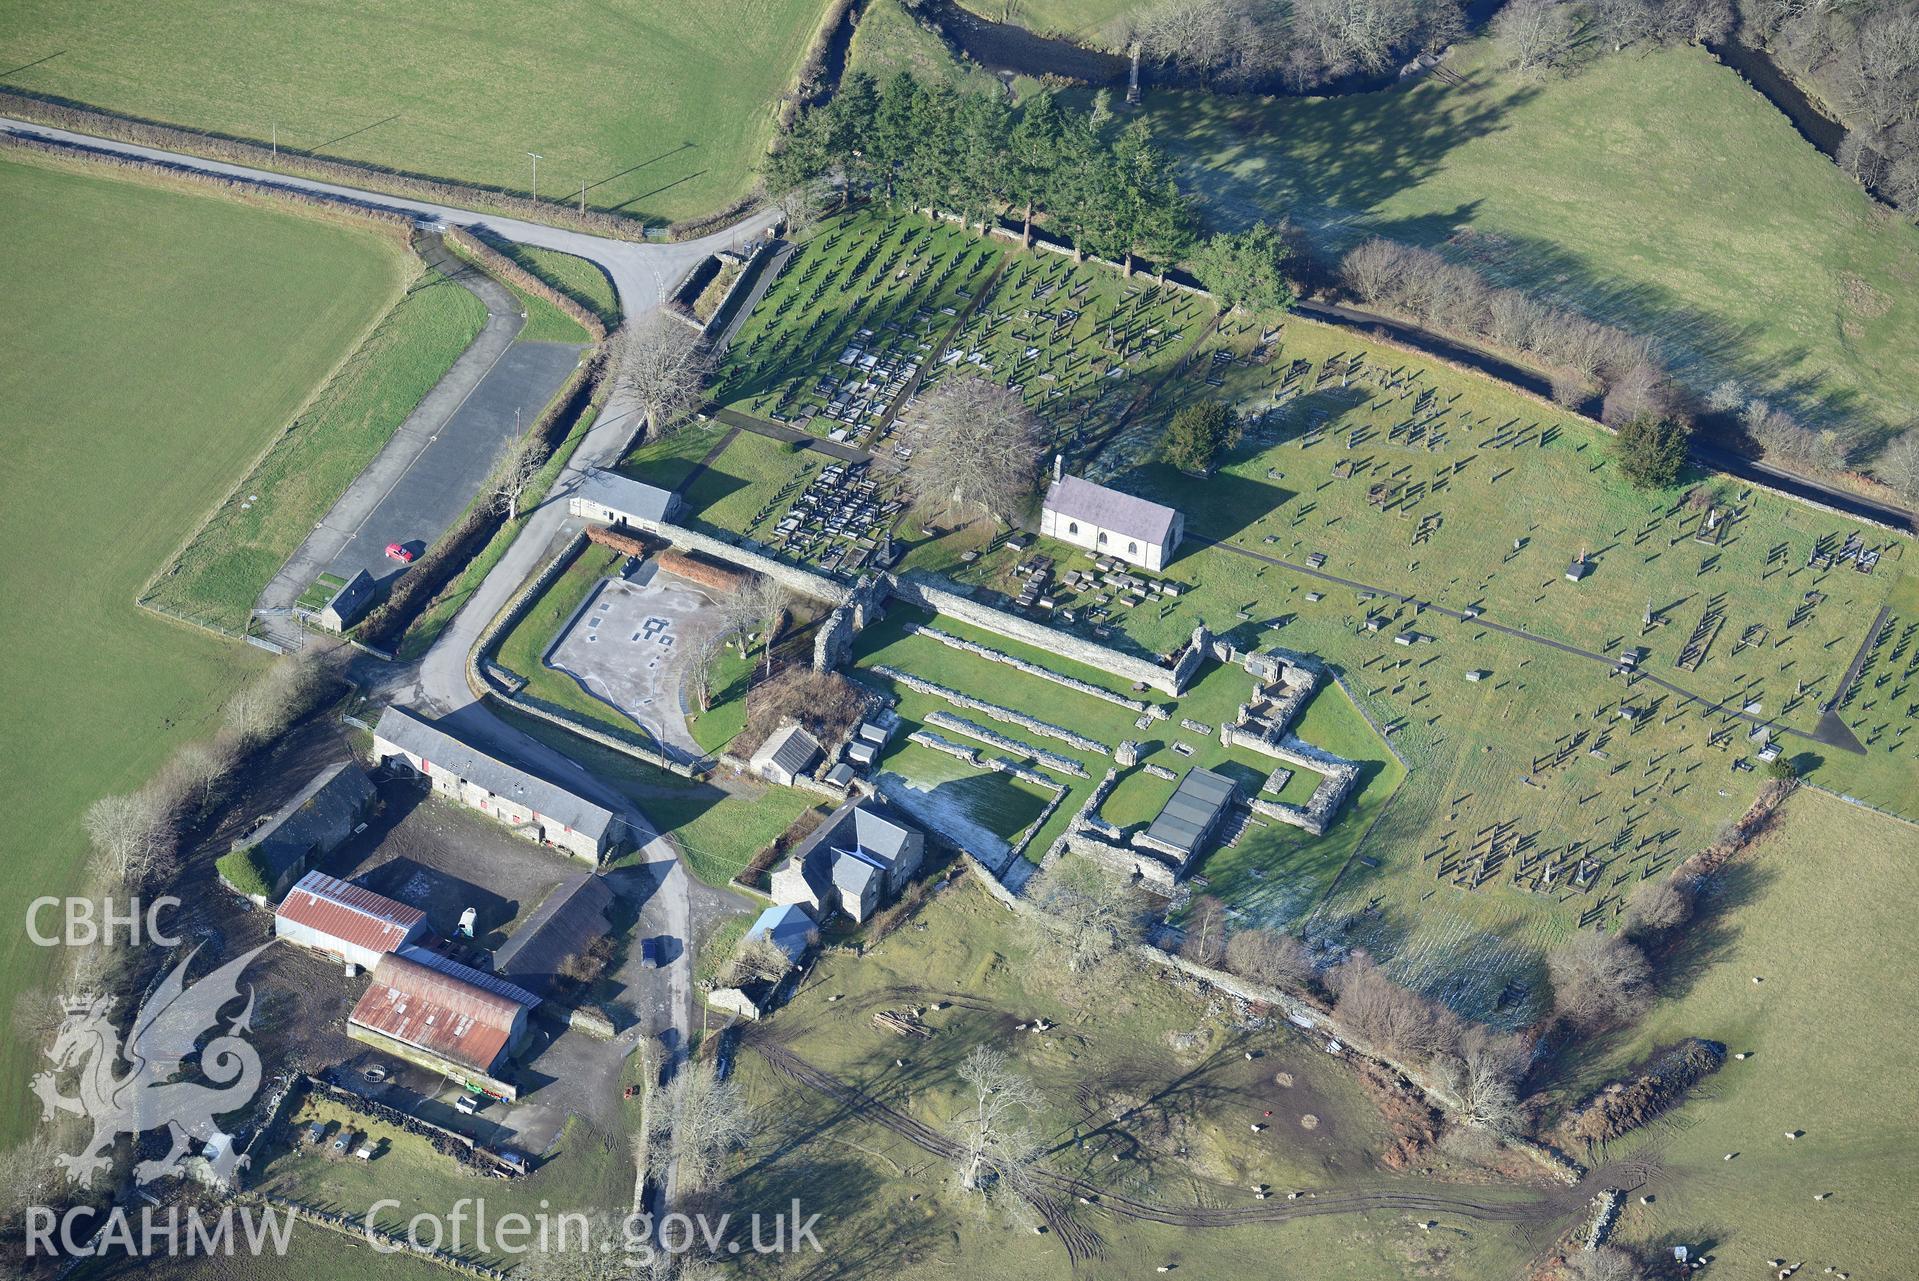 The abbey, abbey farmhouse and St. Mary's Church at Strata Florida, Pontrhydfendigaid. Oblique aerial photograph taken during the Royal Commission's programme of archaeological aerial reconnaissance by Toby Driver on 4th February 2015.